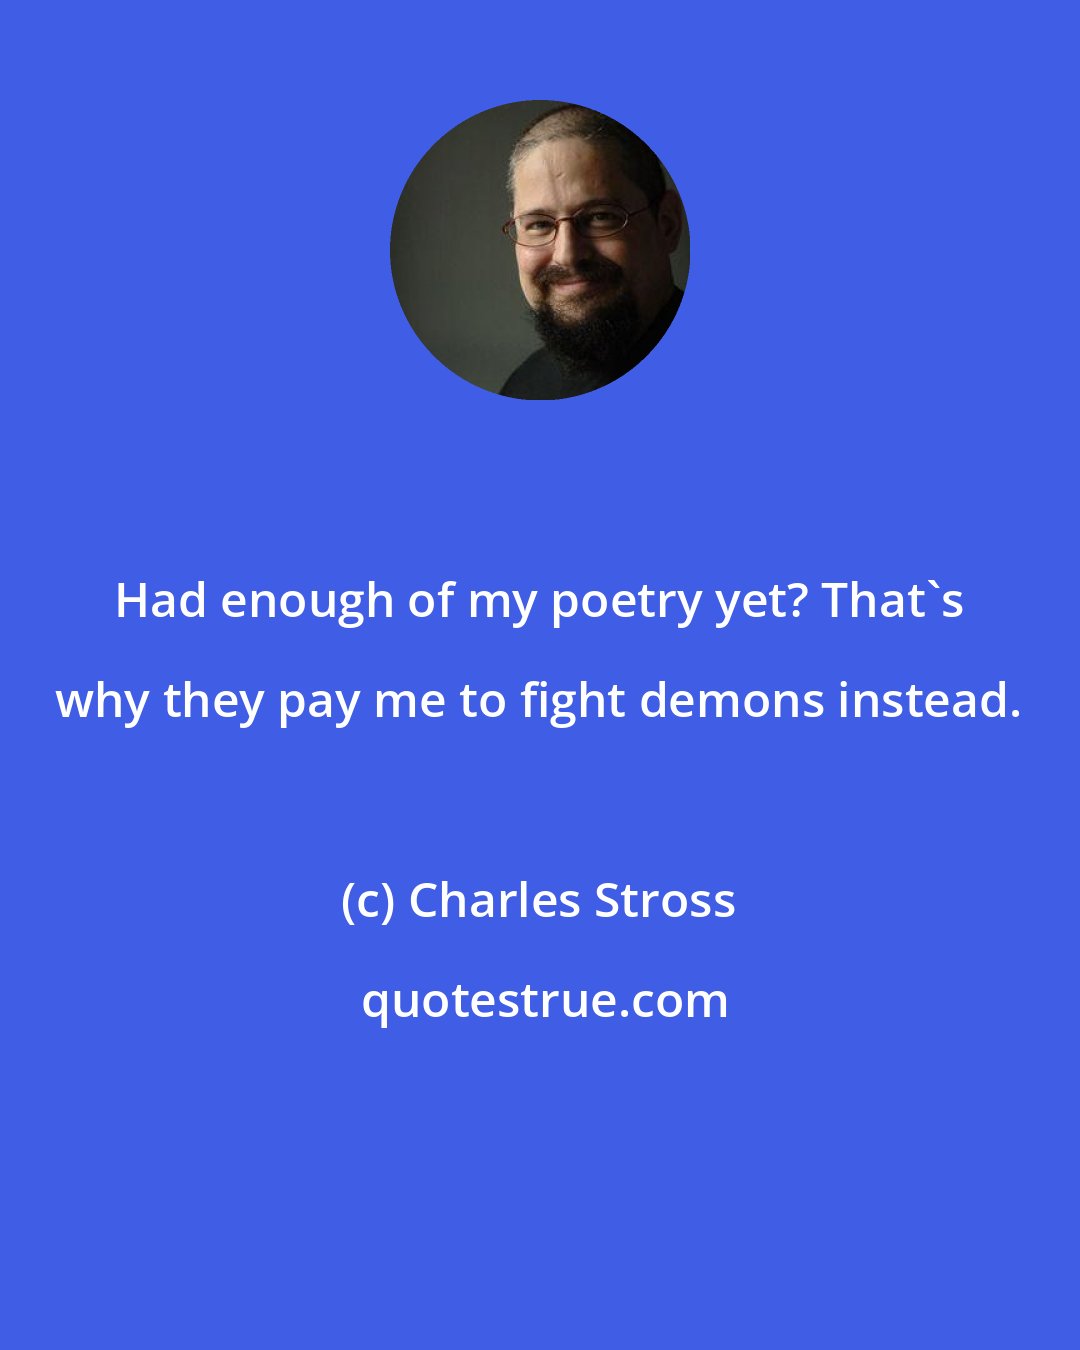 Charles Stross: Had enough of my poetry yet? That's why they pay me to fight demons instead.